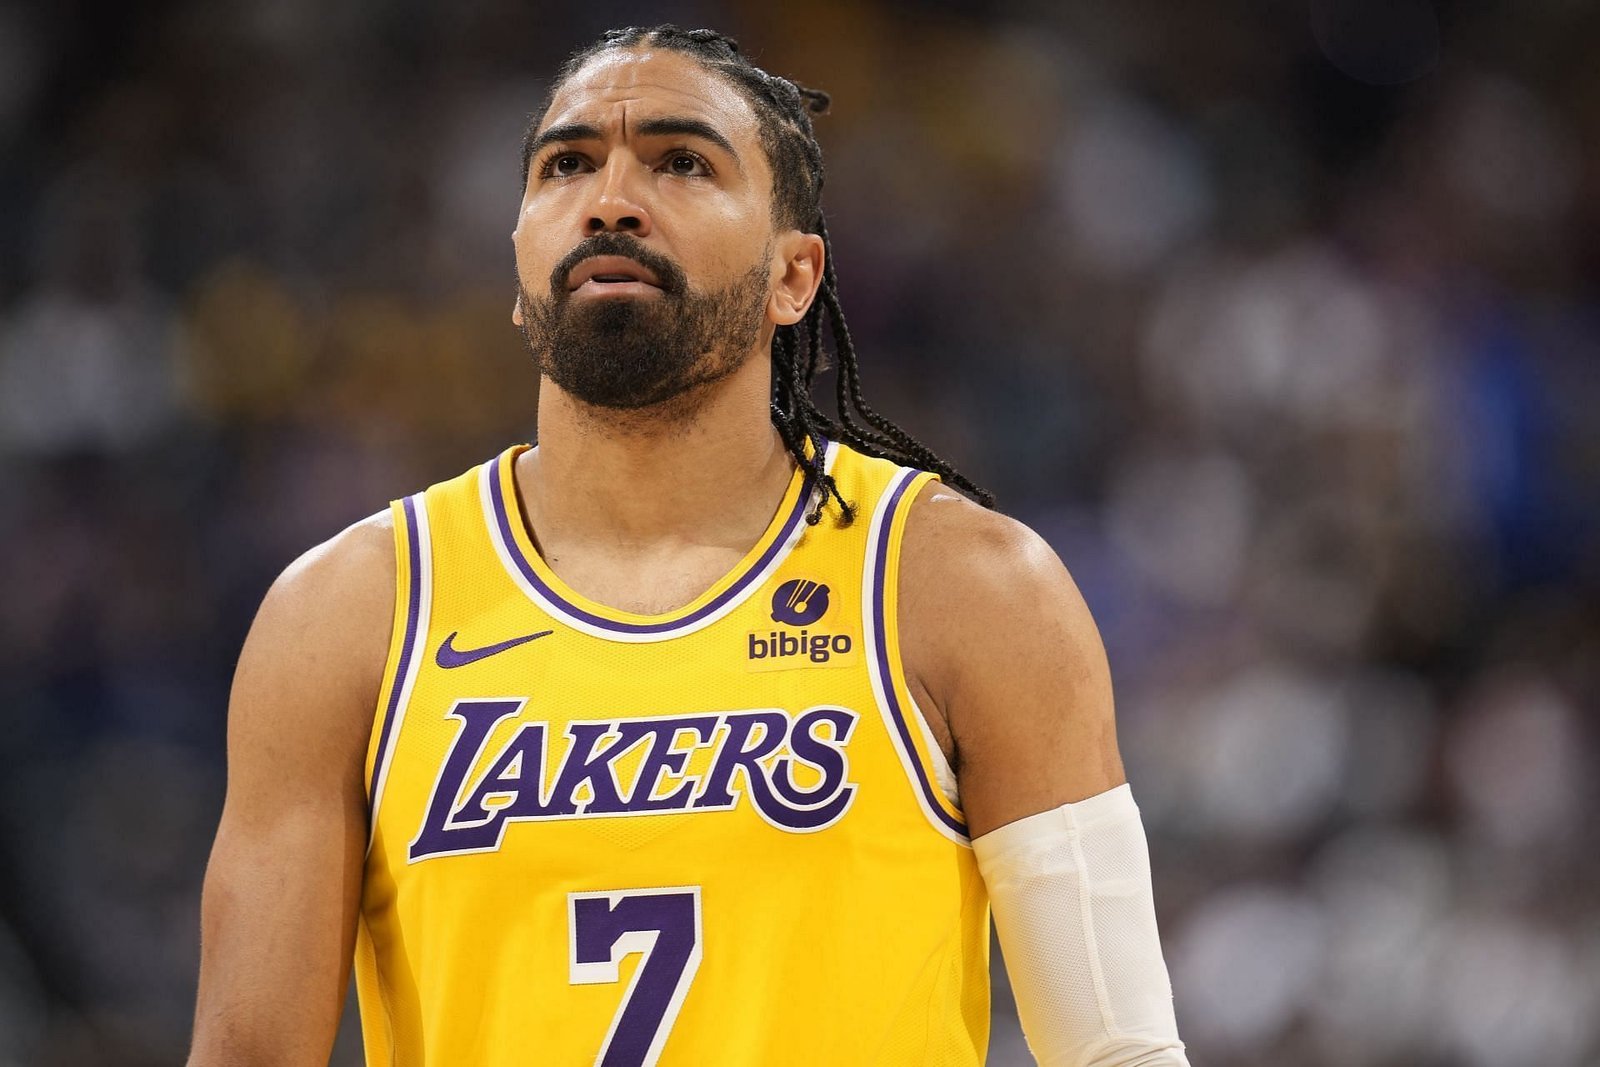 Insider reports concerning update for Lakers guard as he misses 25th game of the season